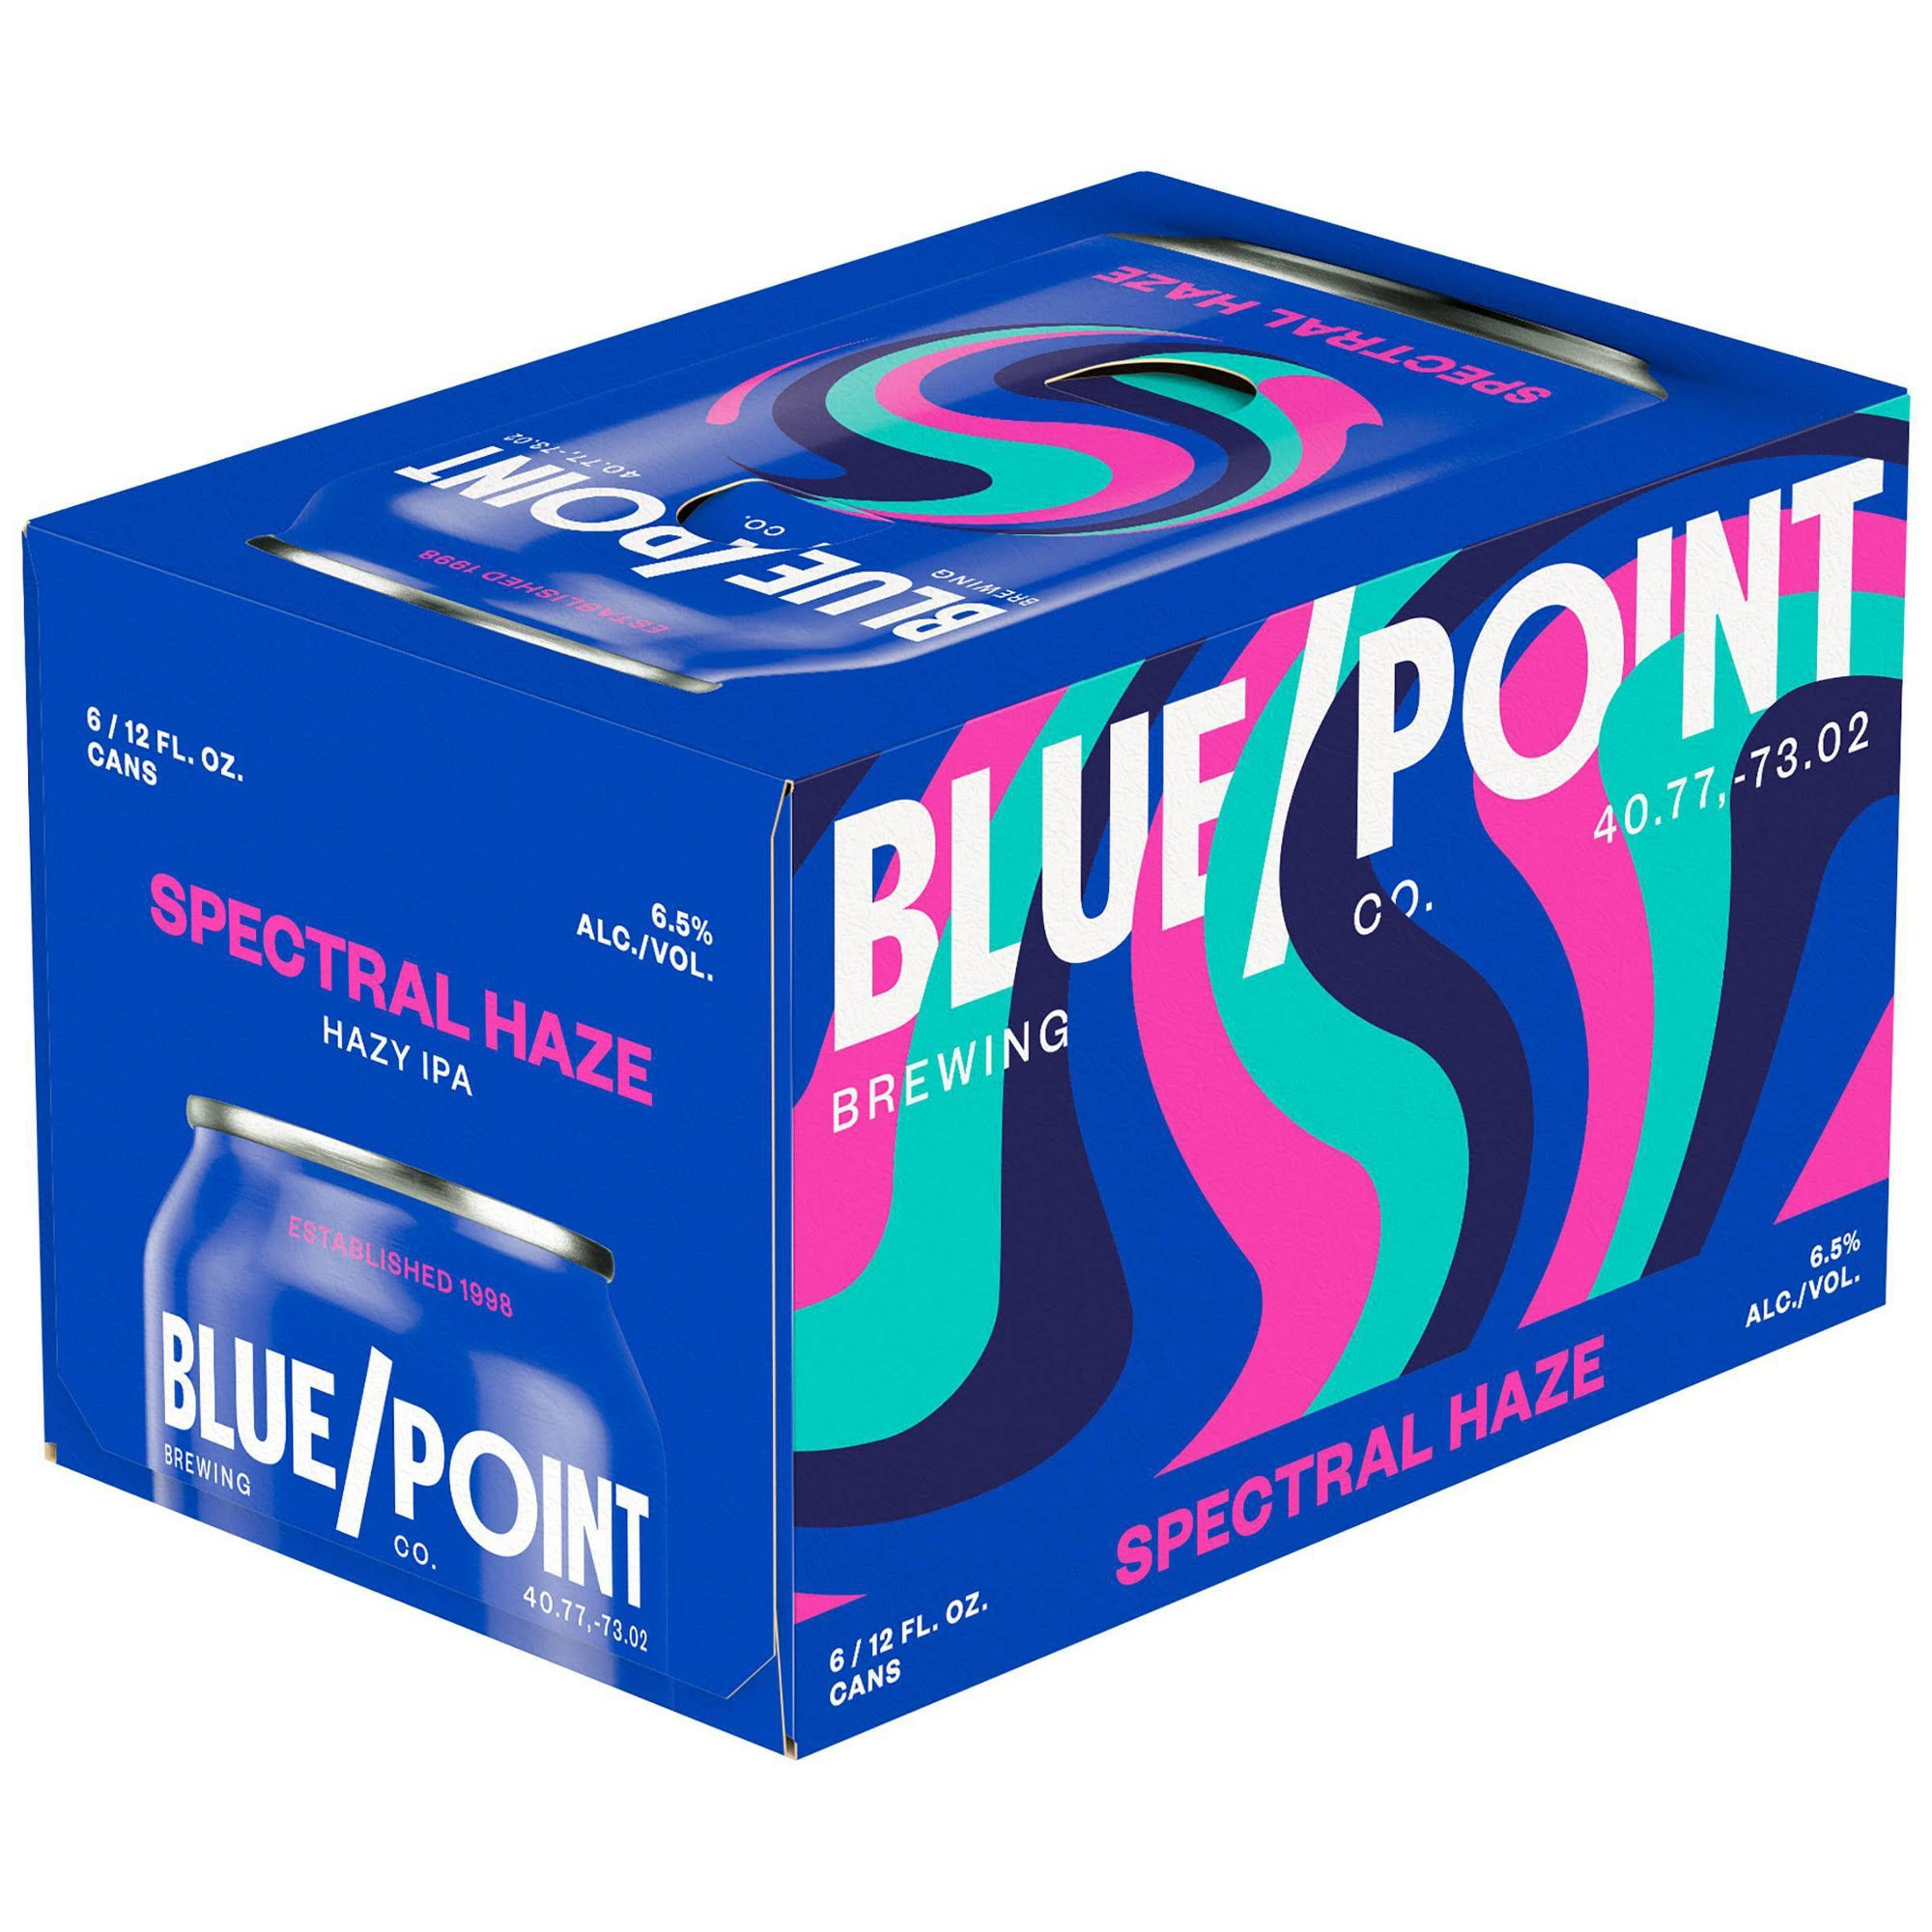 Blue Point Beer, The IPA - 6 pack, 12 fl oz cans